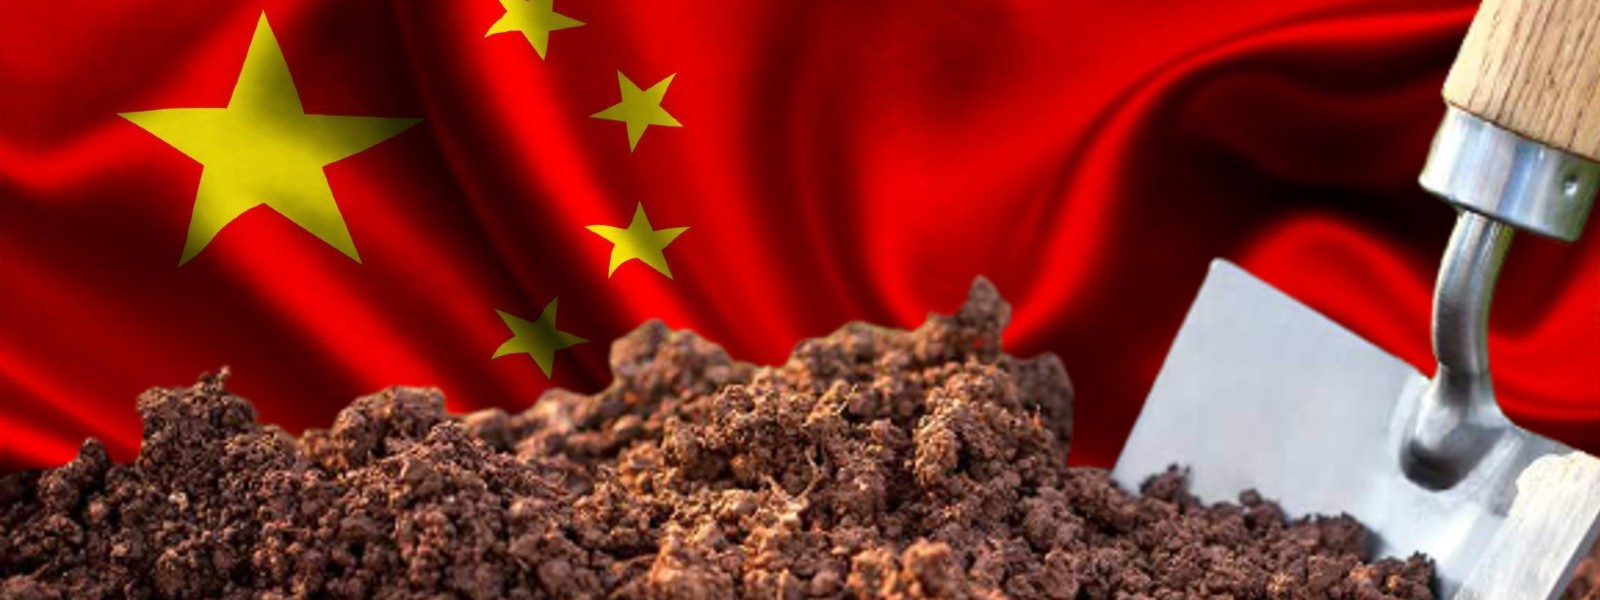 Sri Lanka agrees to re-test rejected Chinese Fertilizer – Shasheendra